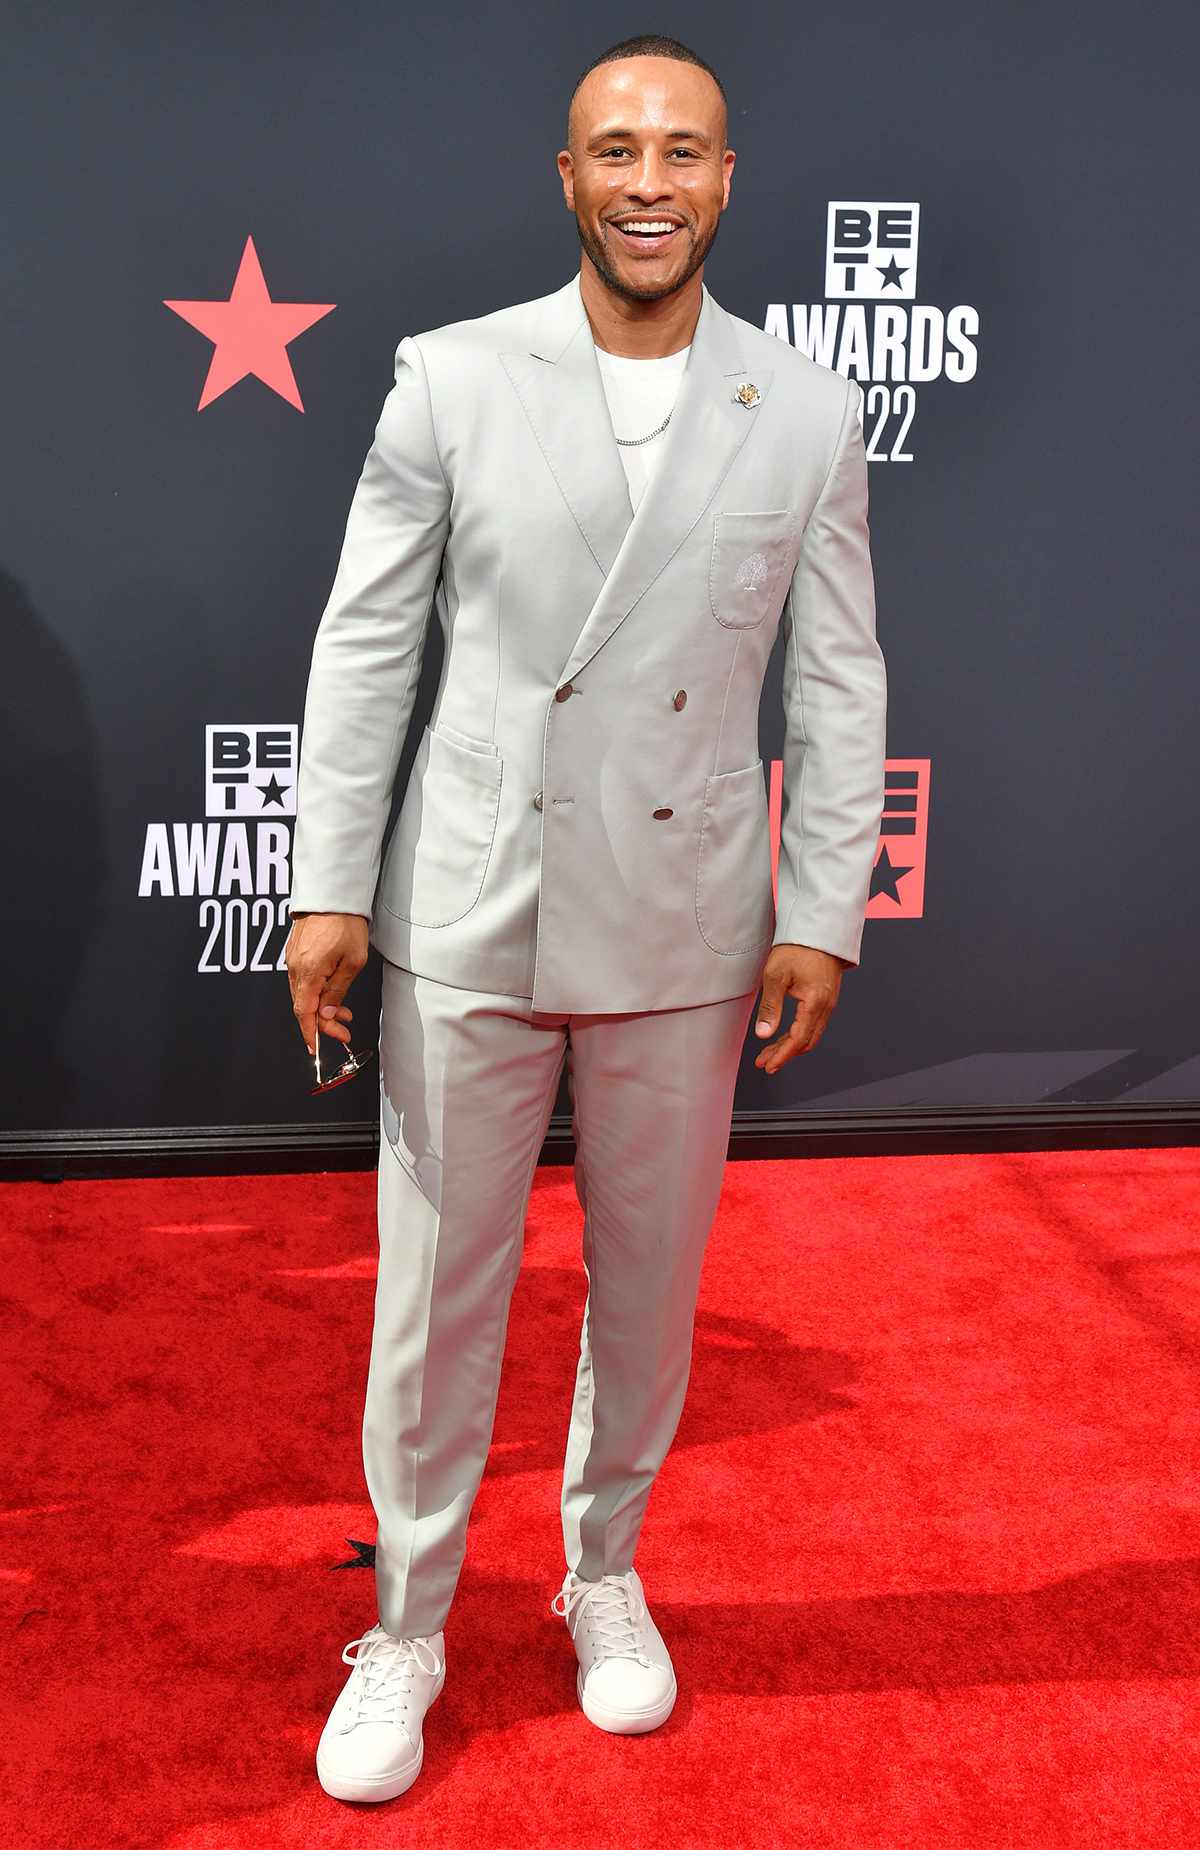 DeVon Franklin attends the 2022 BET Awards at Microsoft Theater on June 26, 2022 in Los Angeles, California.